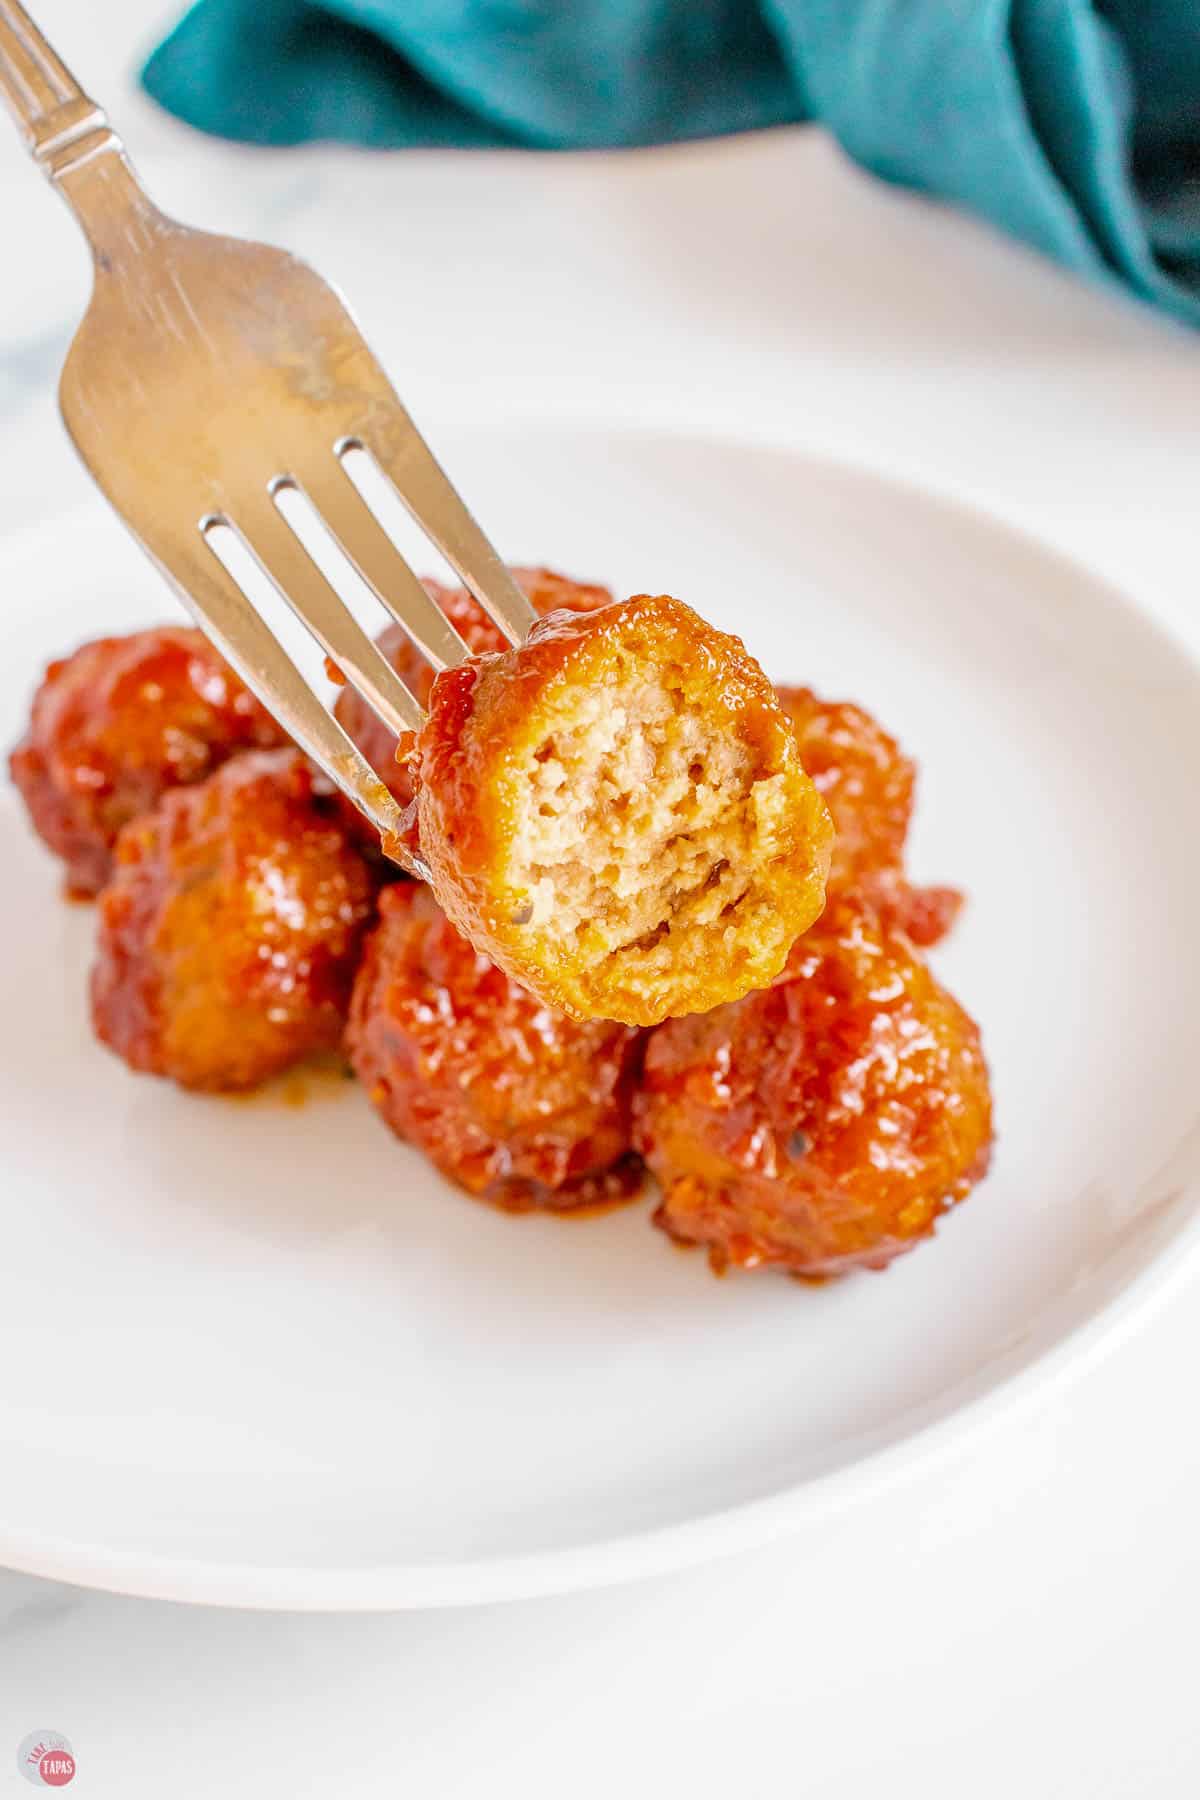 meatball on a fork with a bite missing